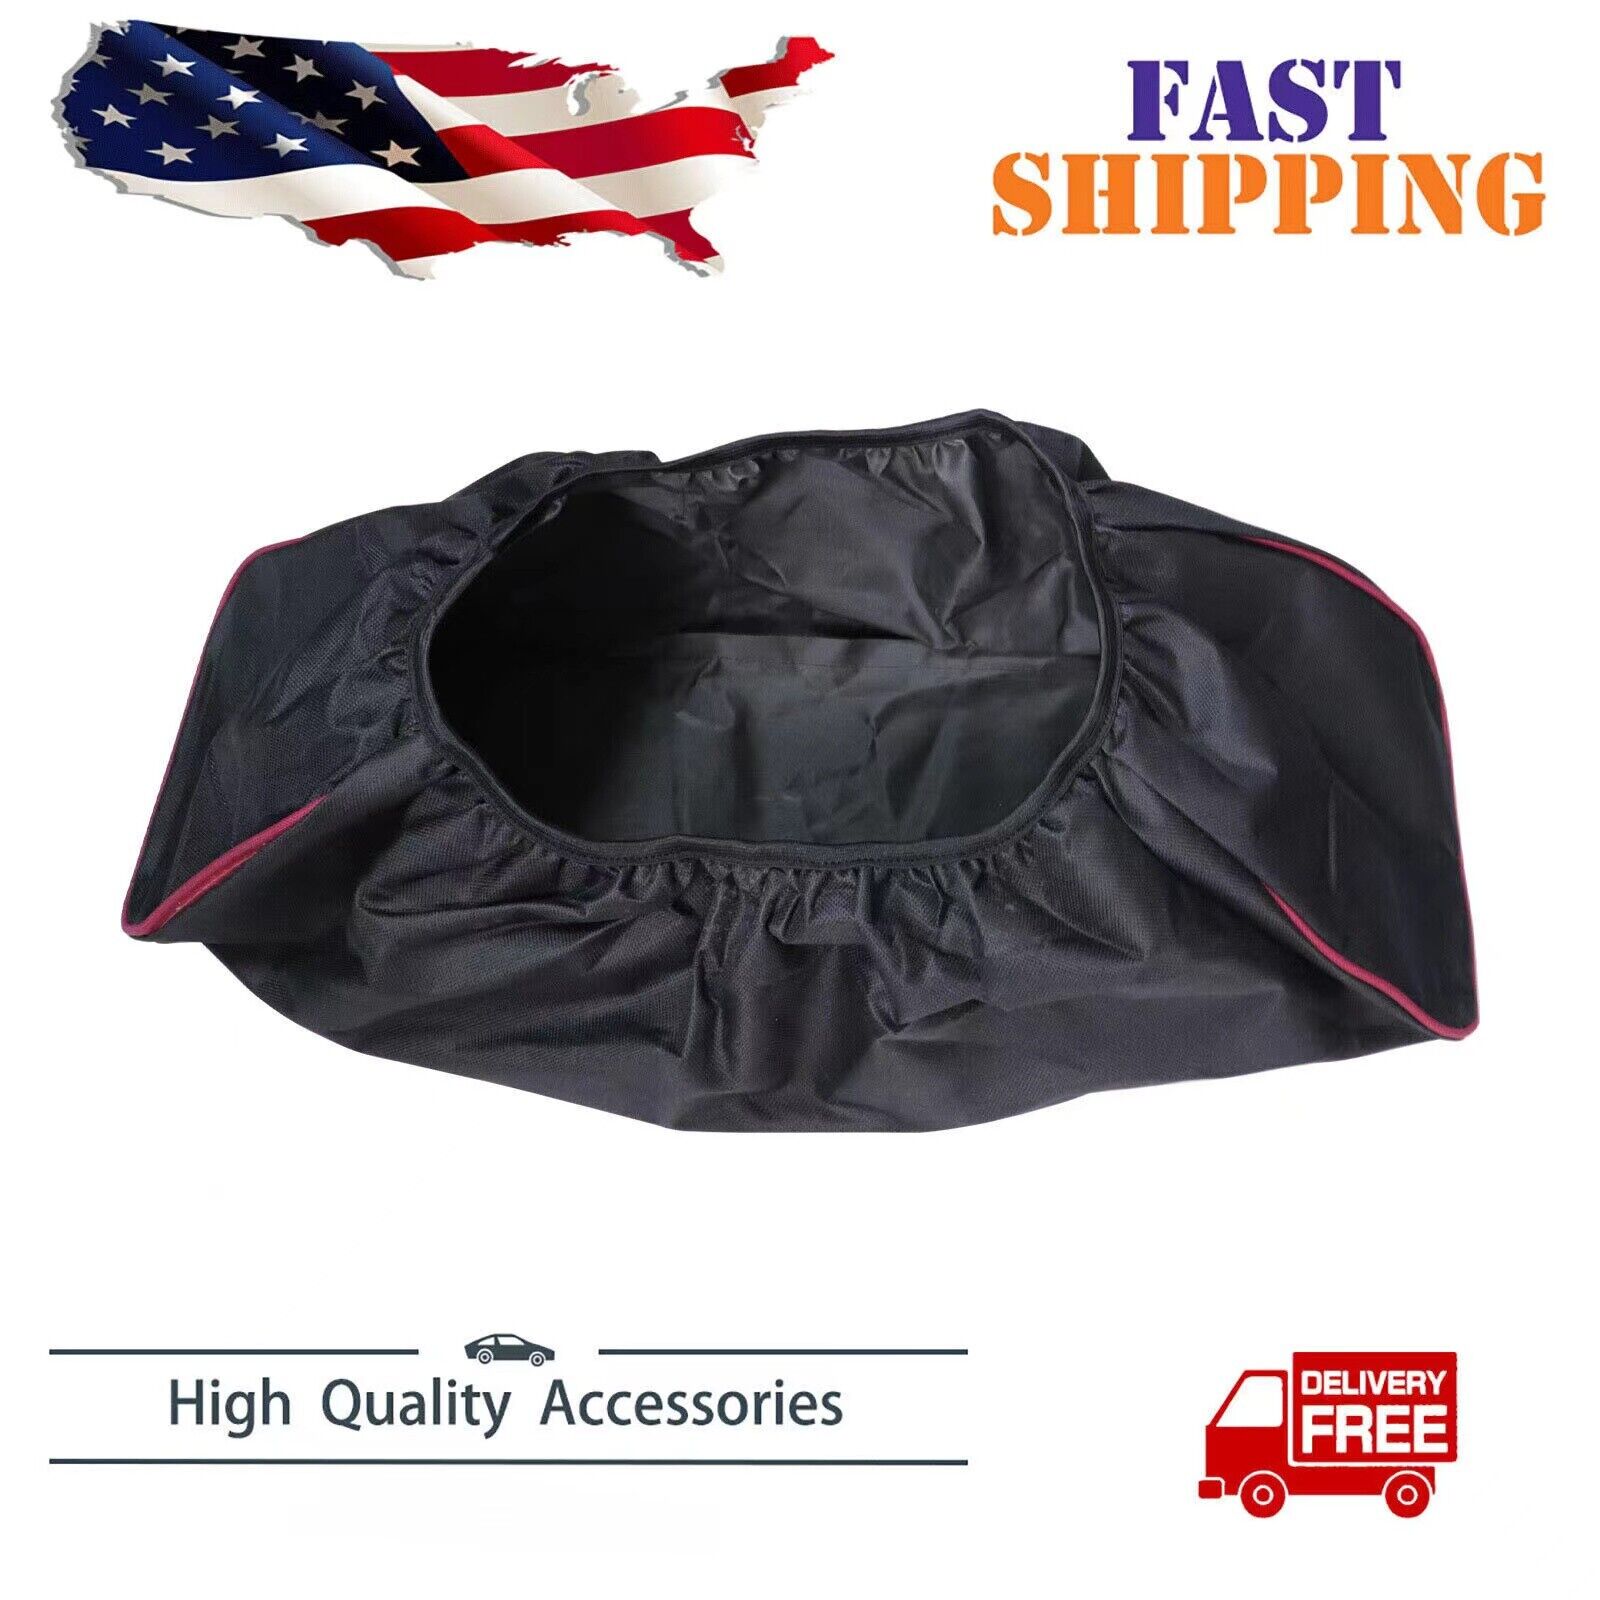 Waterproof Soft Winch Cover Fit For 12,000 lb Winch & Other Winches 8,500-17,500